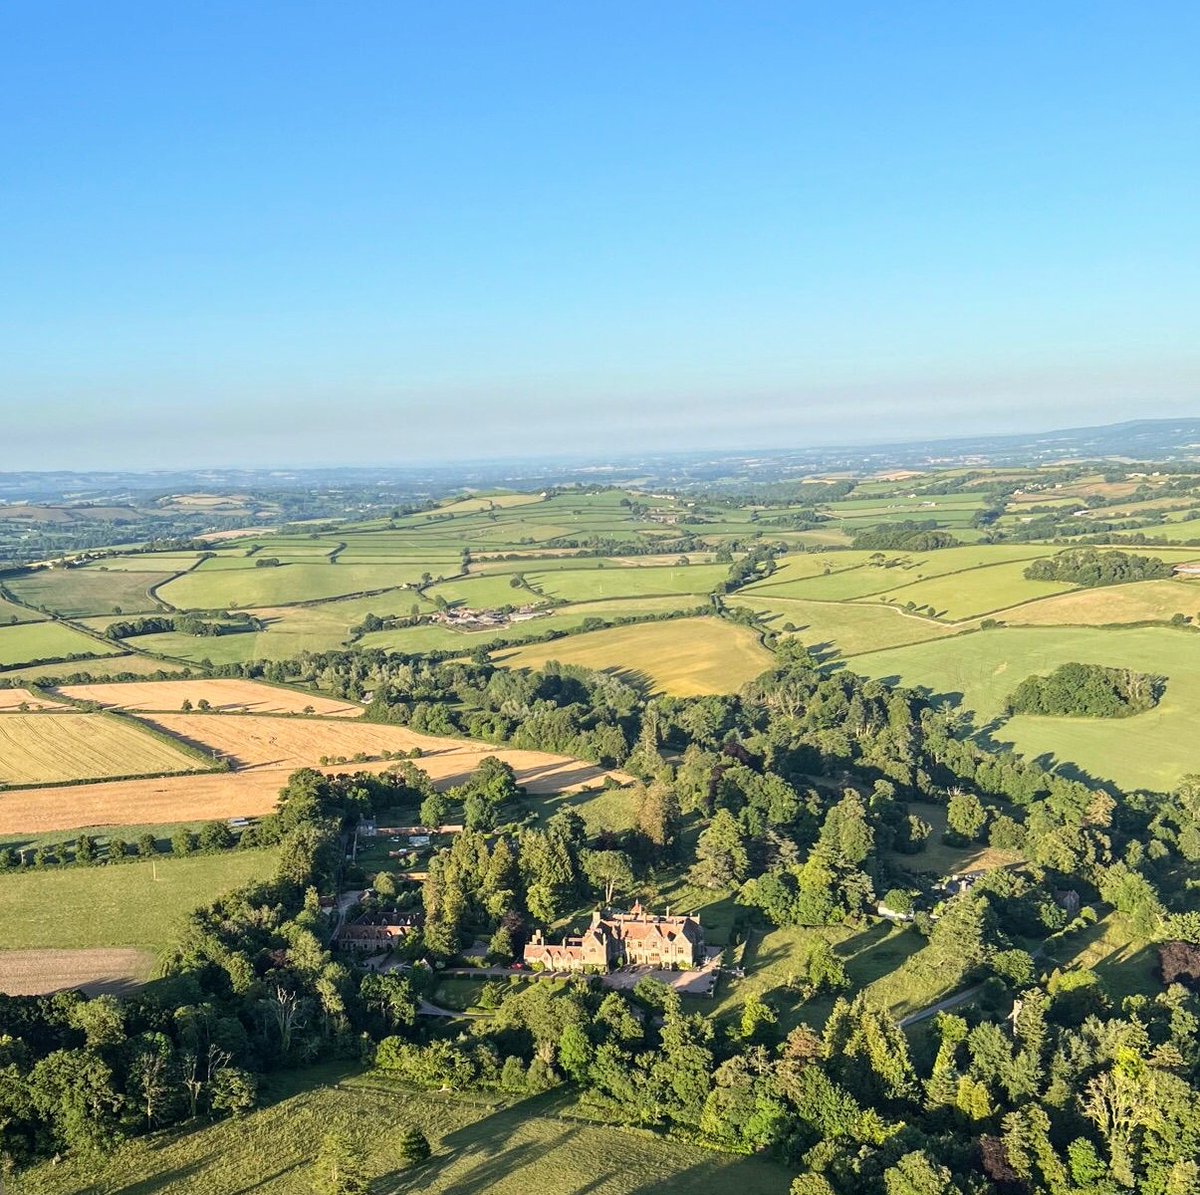 Huntsham Court from above! As you can see, we are surrounded by beautiful Devon #countryside... Which is why we are often described as a #hiddengem wedding venue. Now taking bookings for 2024, #enquire for more details! #wedding #gettingmarried #ido #weddingvenue #venue #Devon